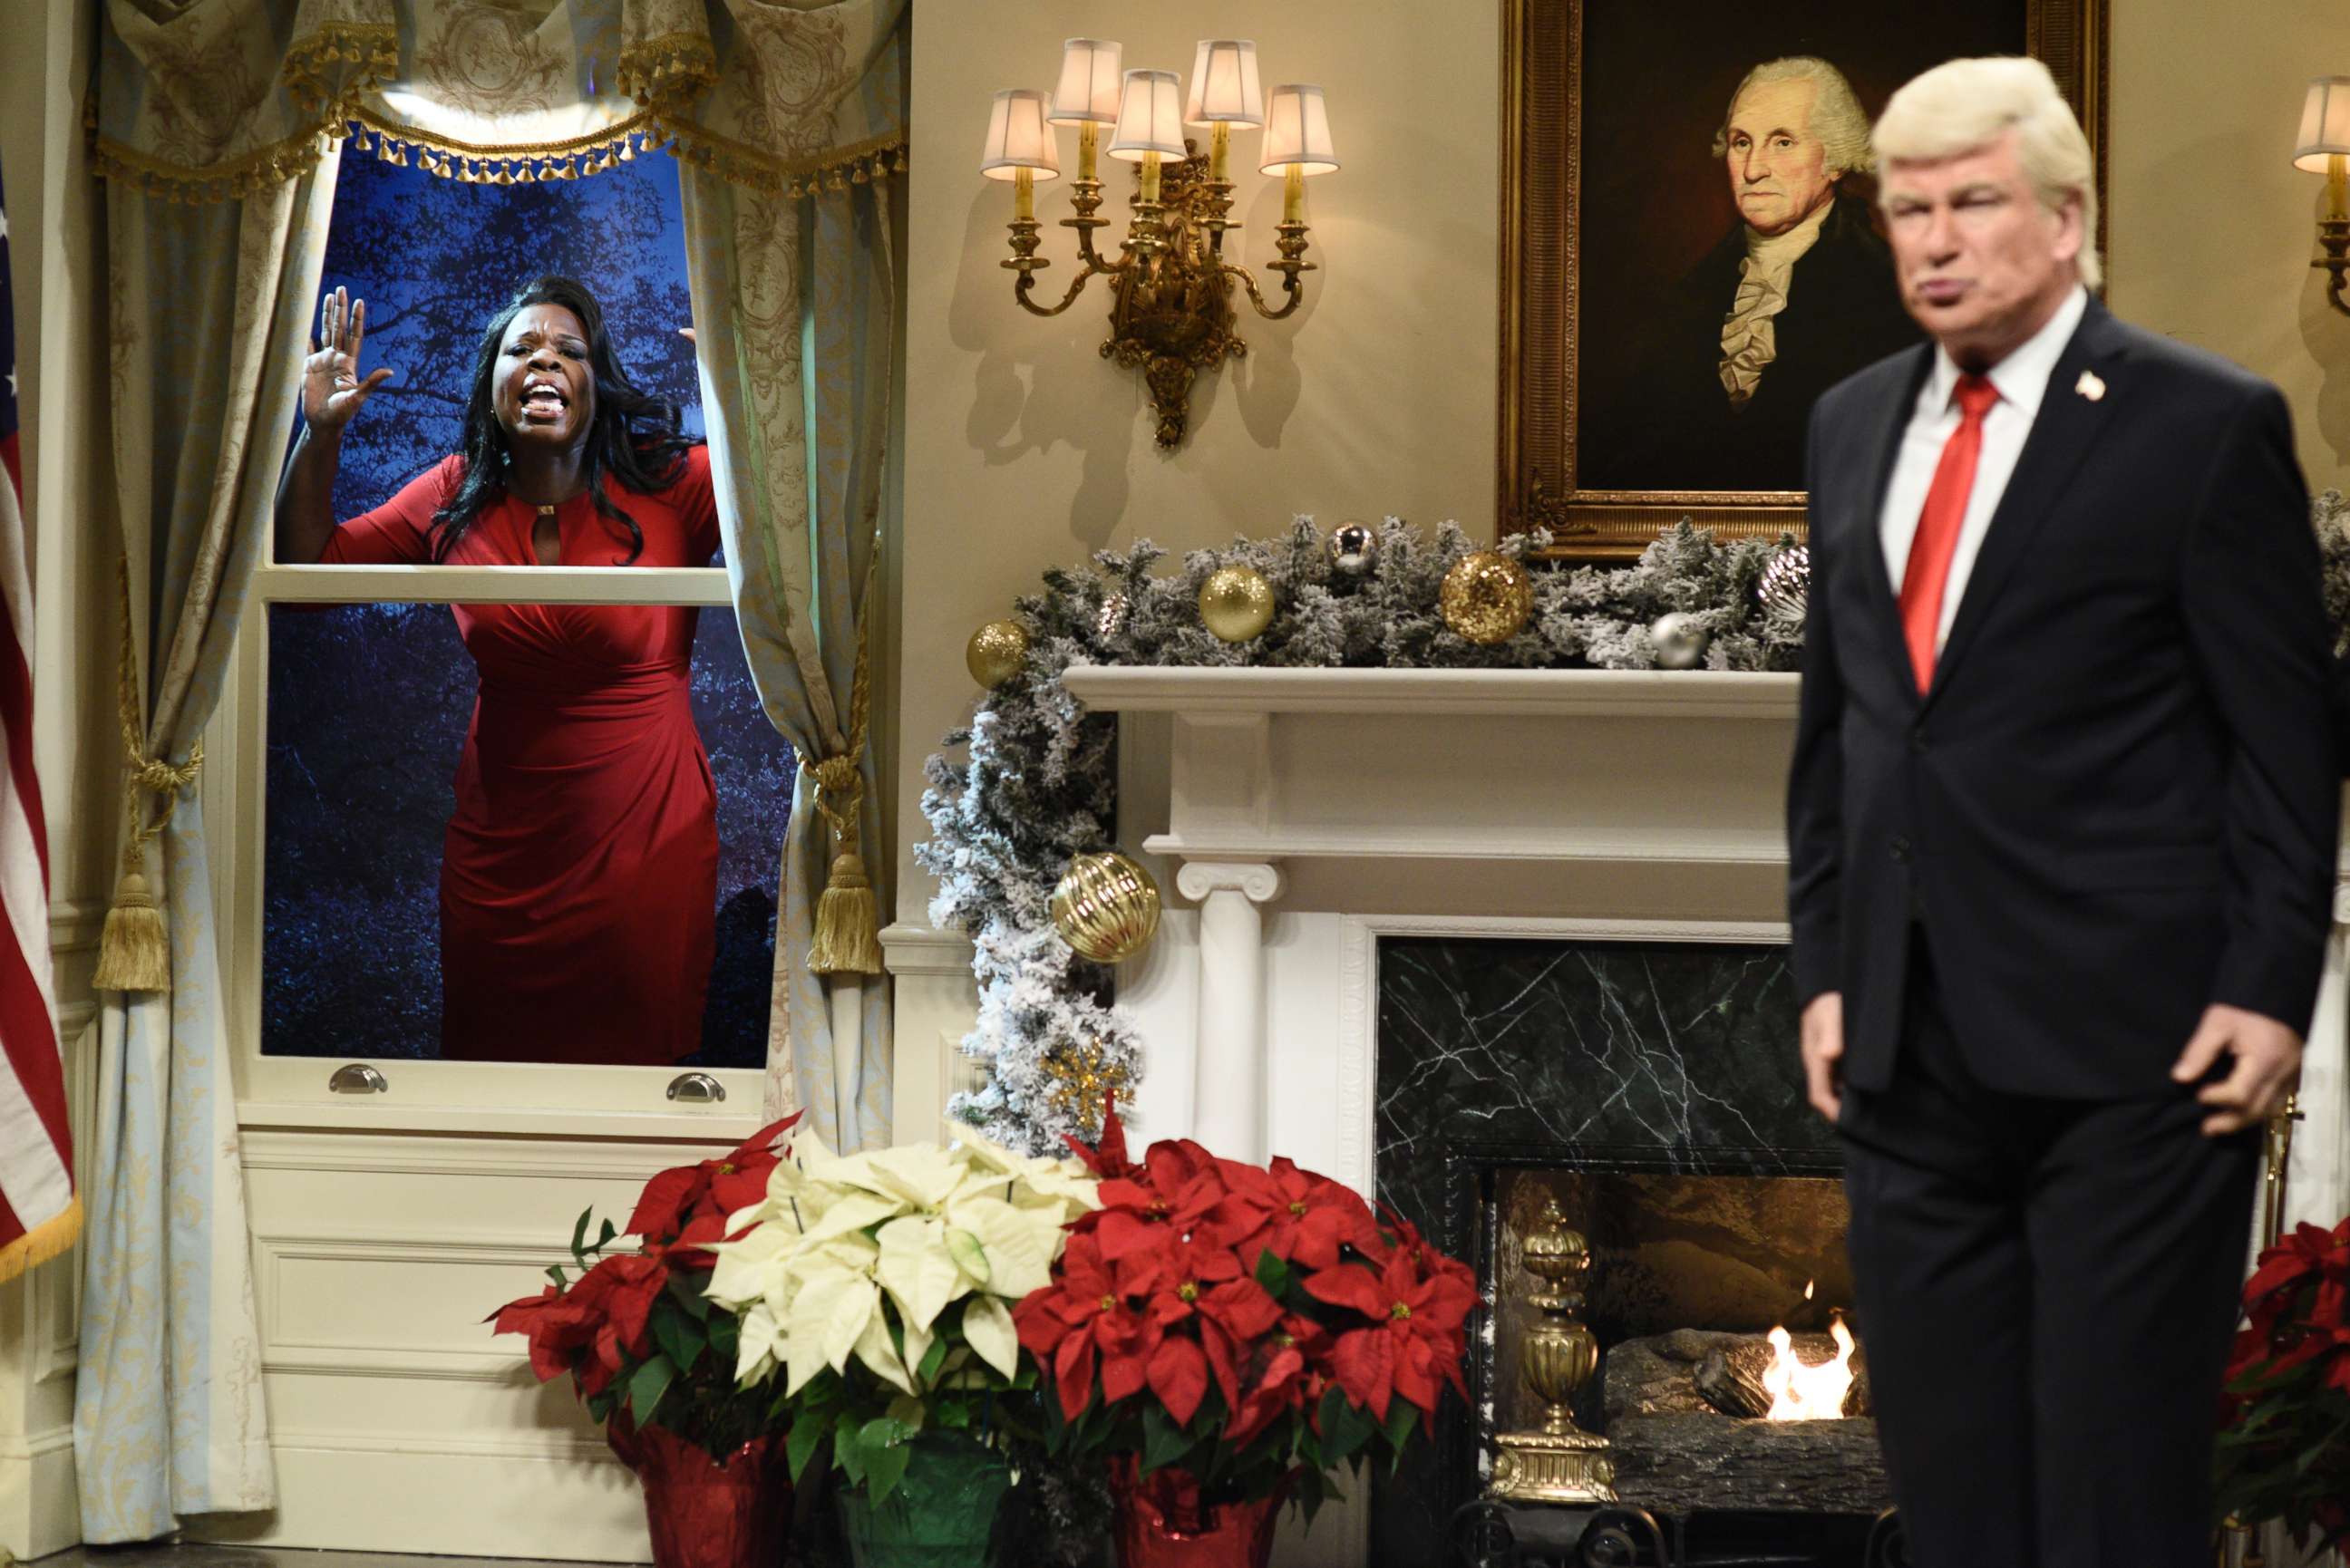 PHOTO: SATURDAY NIGHT LIVE -- Episode 1734 -- Pictured: (l-r) Leslie Jones as Omarosa Manigault, Alec Baldwin as President Donald J. Trump during "White House Tree Trimming Cold Open" in Studio 8H on Saturday, December 16, 2017 